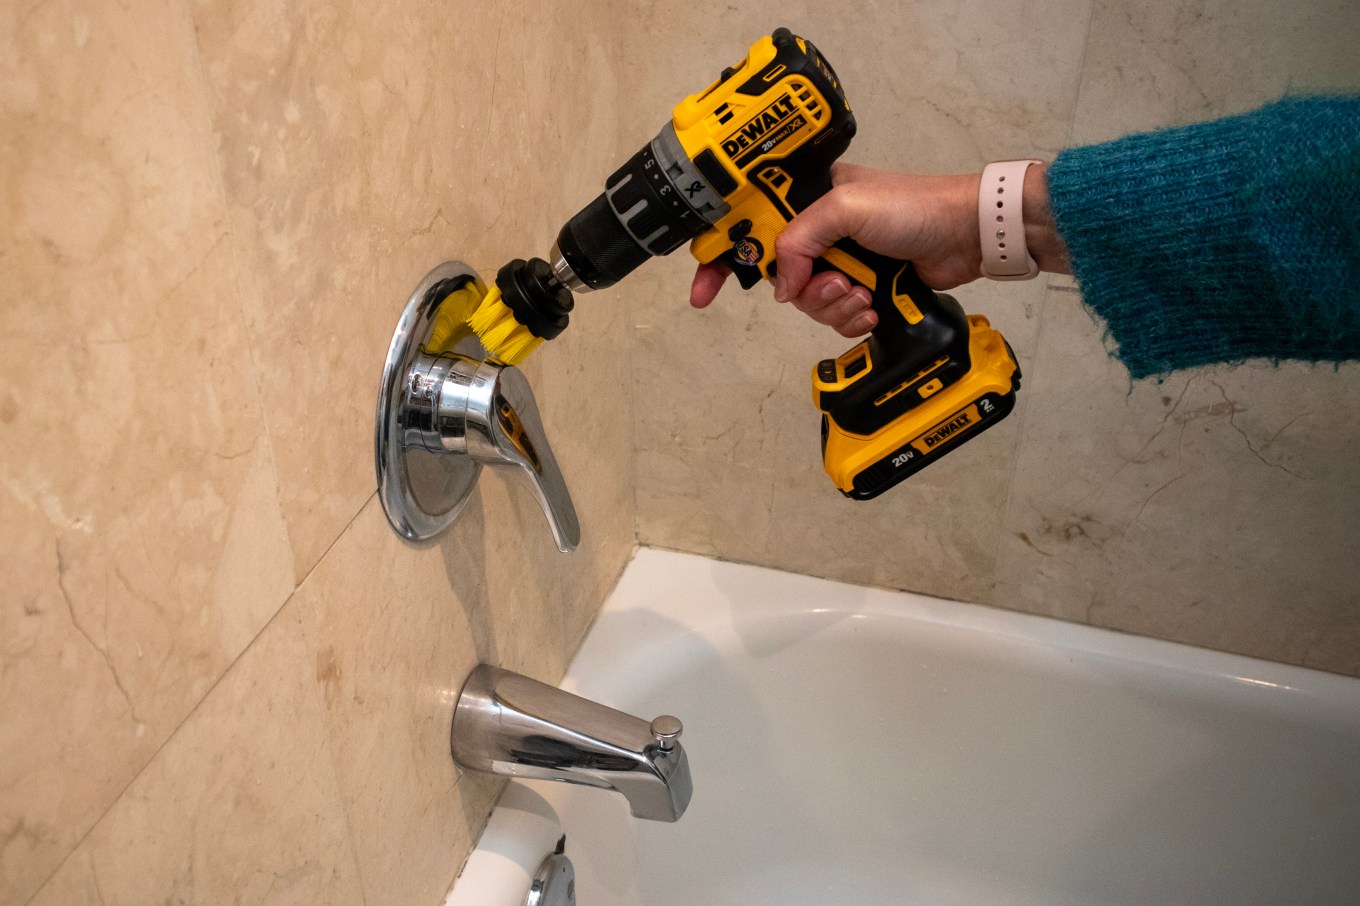 A drill with a cleaning head attachment is used to clean a bathtub.